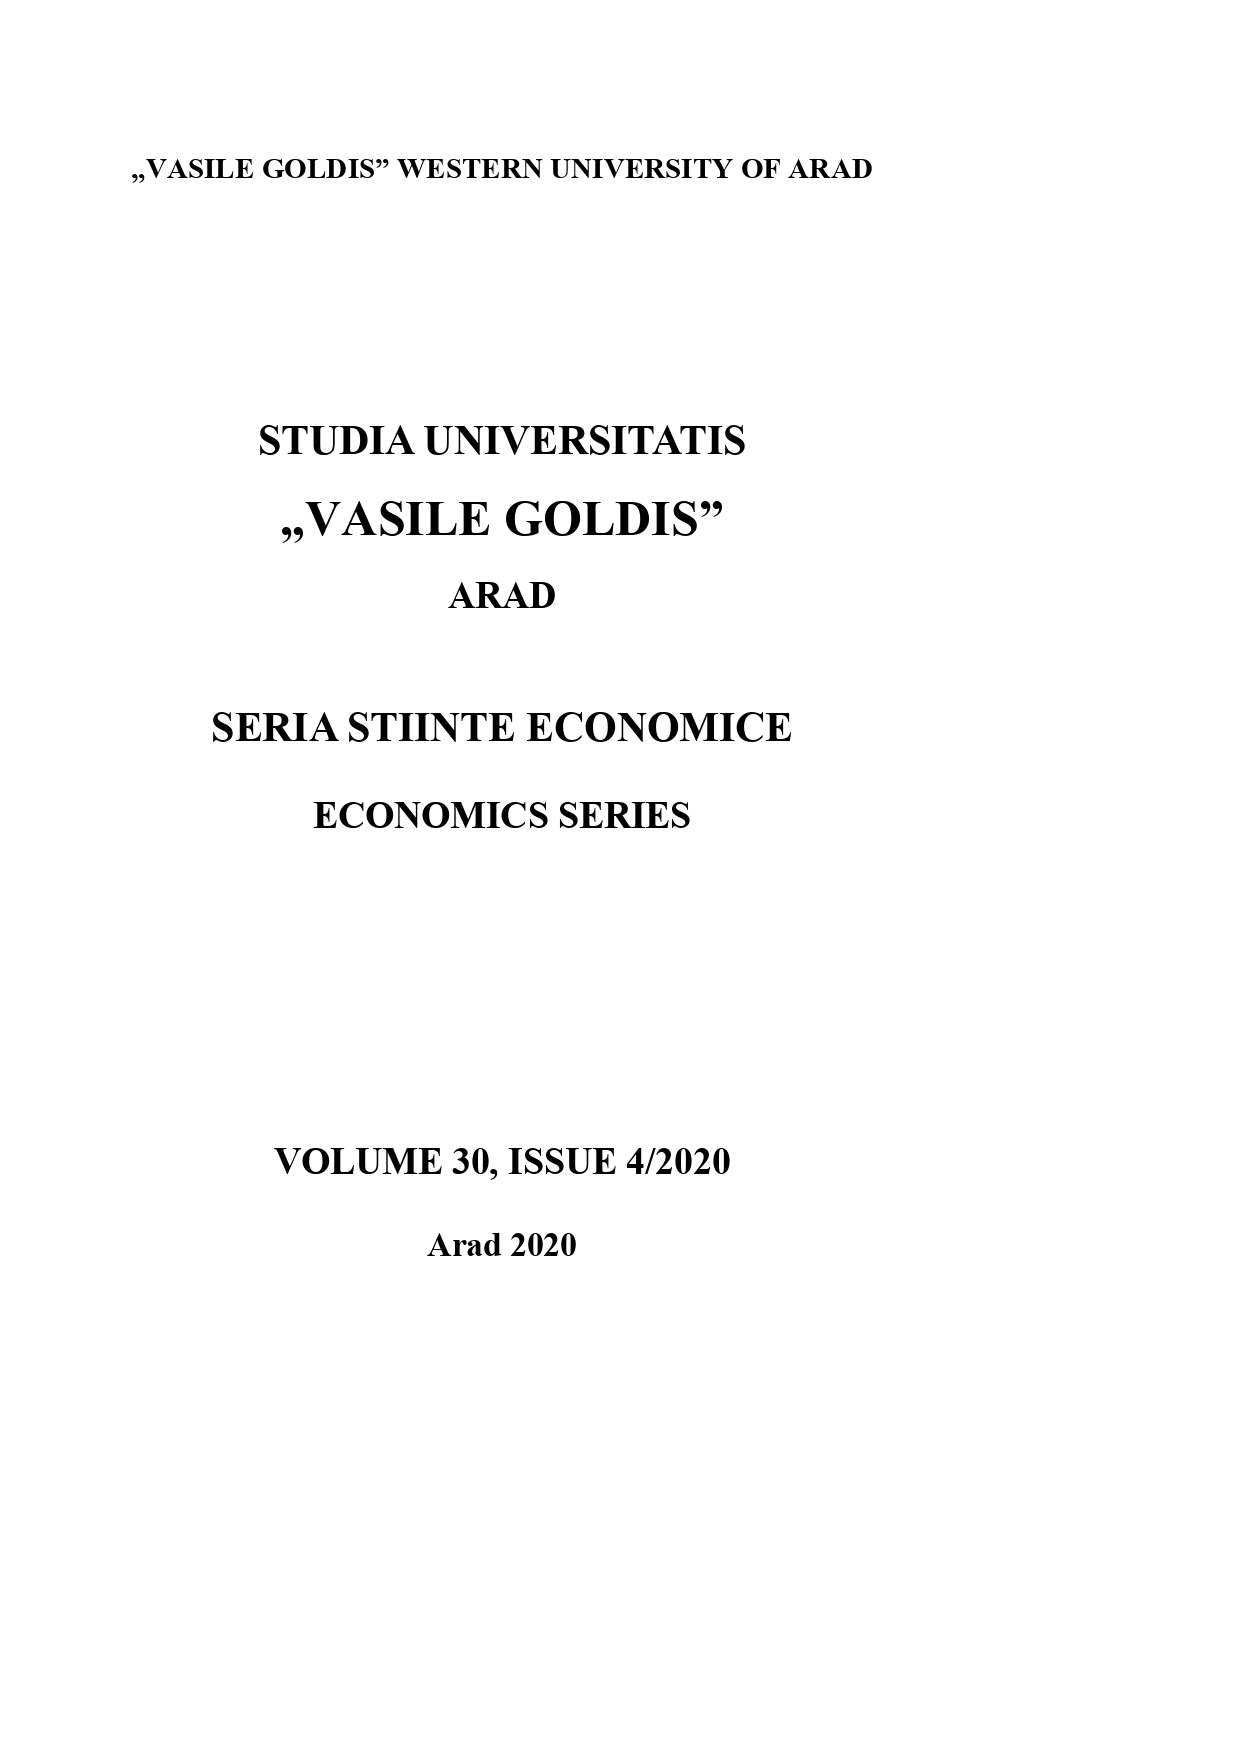 EASE OF DOING BUSINESS AND CAPITAL MARKET DEVELOPMENT IN A DEMAND FOLLOWING HYPOTHESIS: EVIDENCE FROM ECOWAS Cover Image